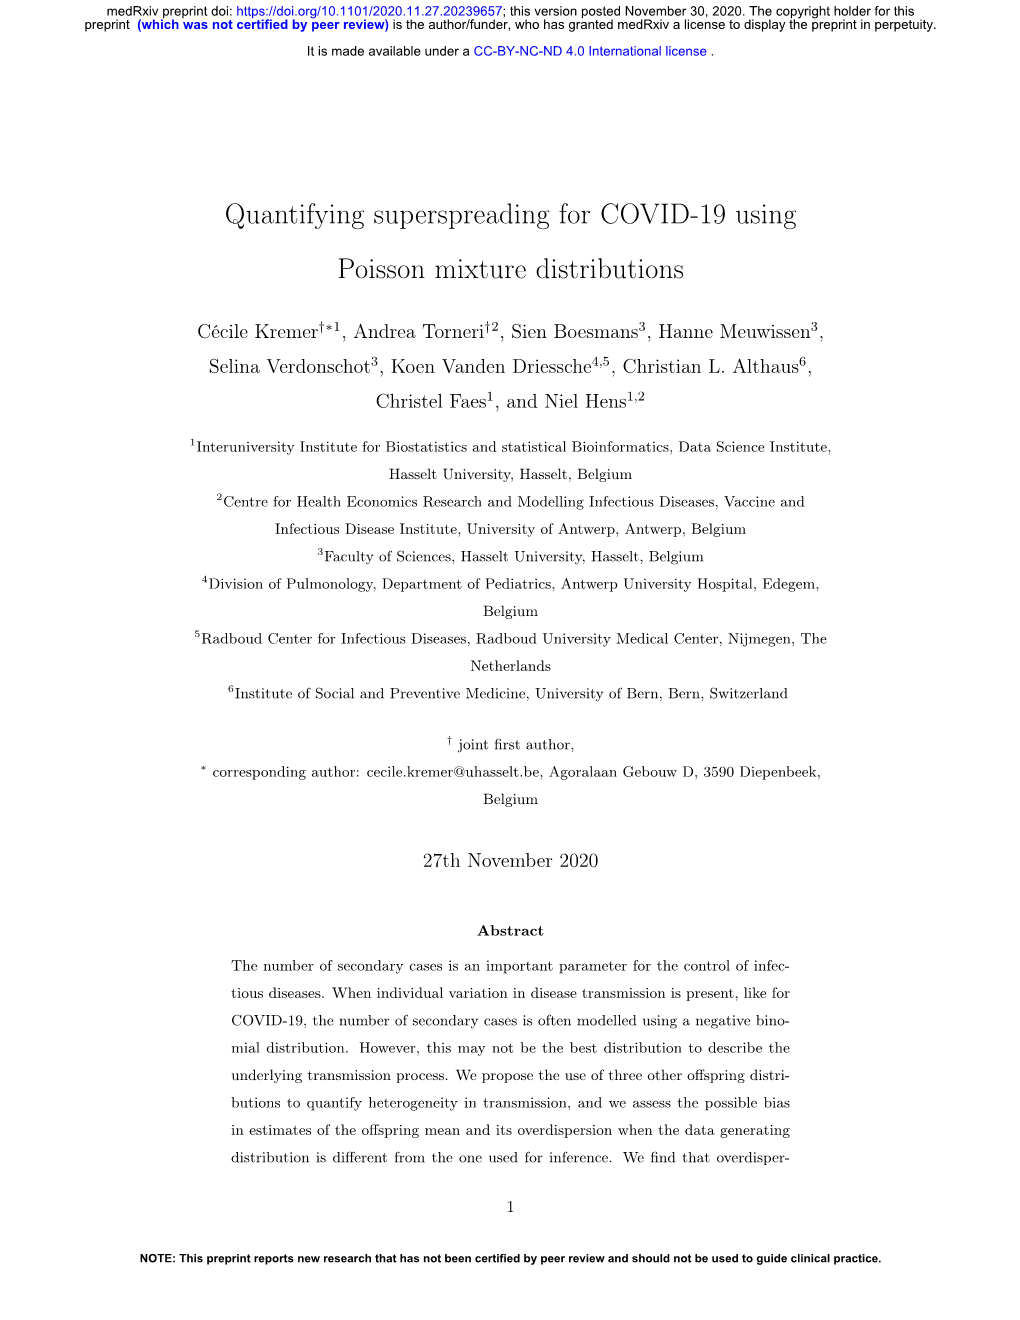 Quantifying Superspreading for COVID-19 Using Poisson Mixture Distributions